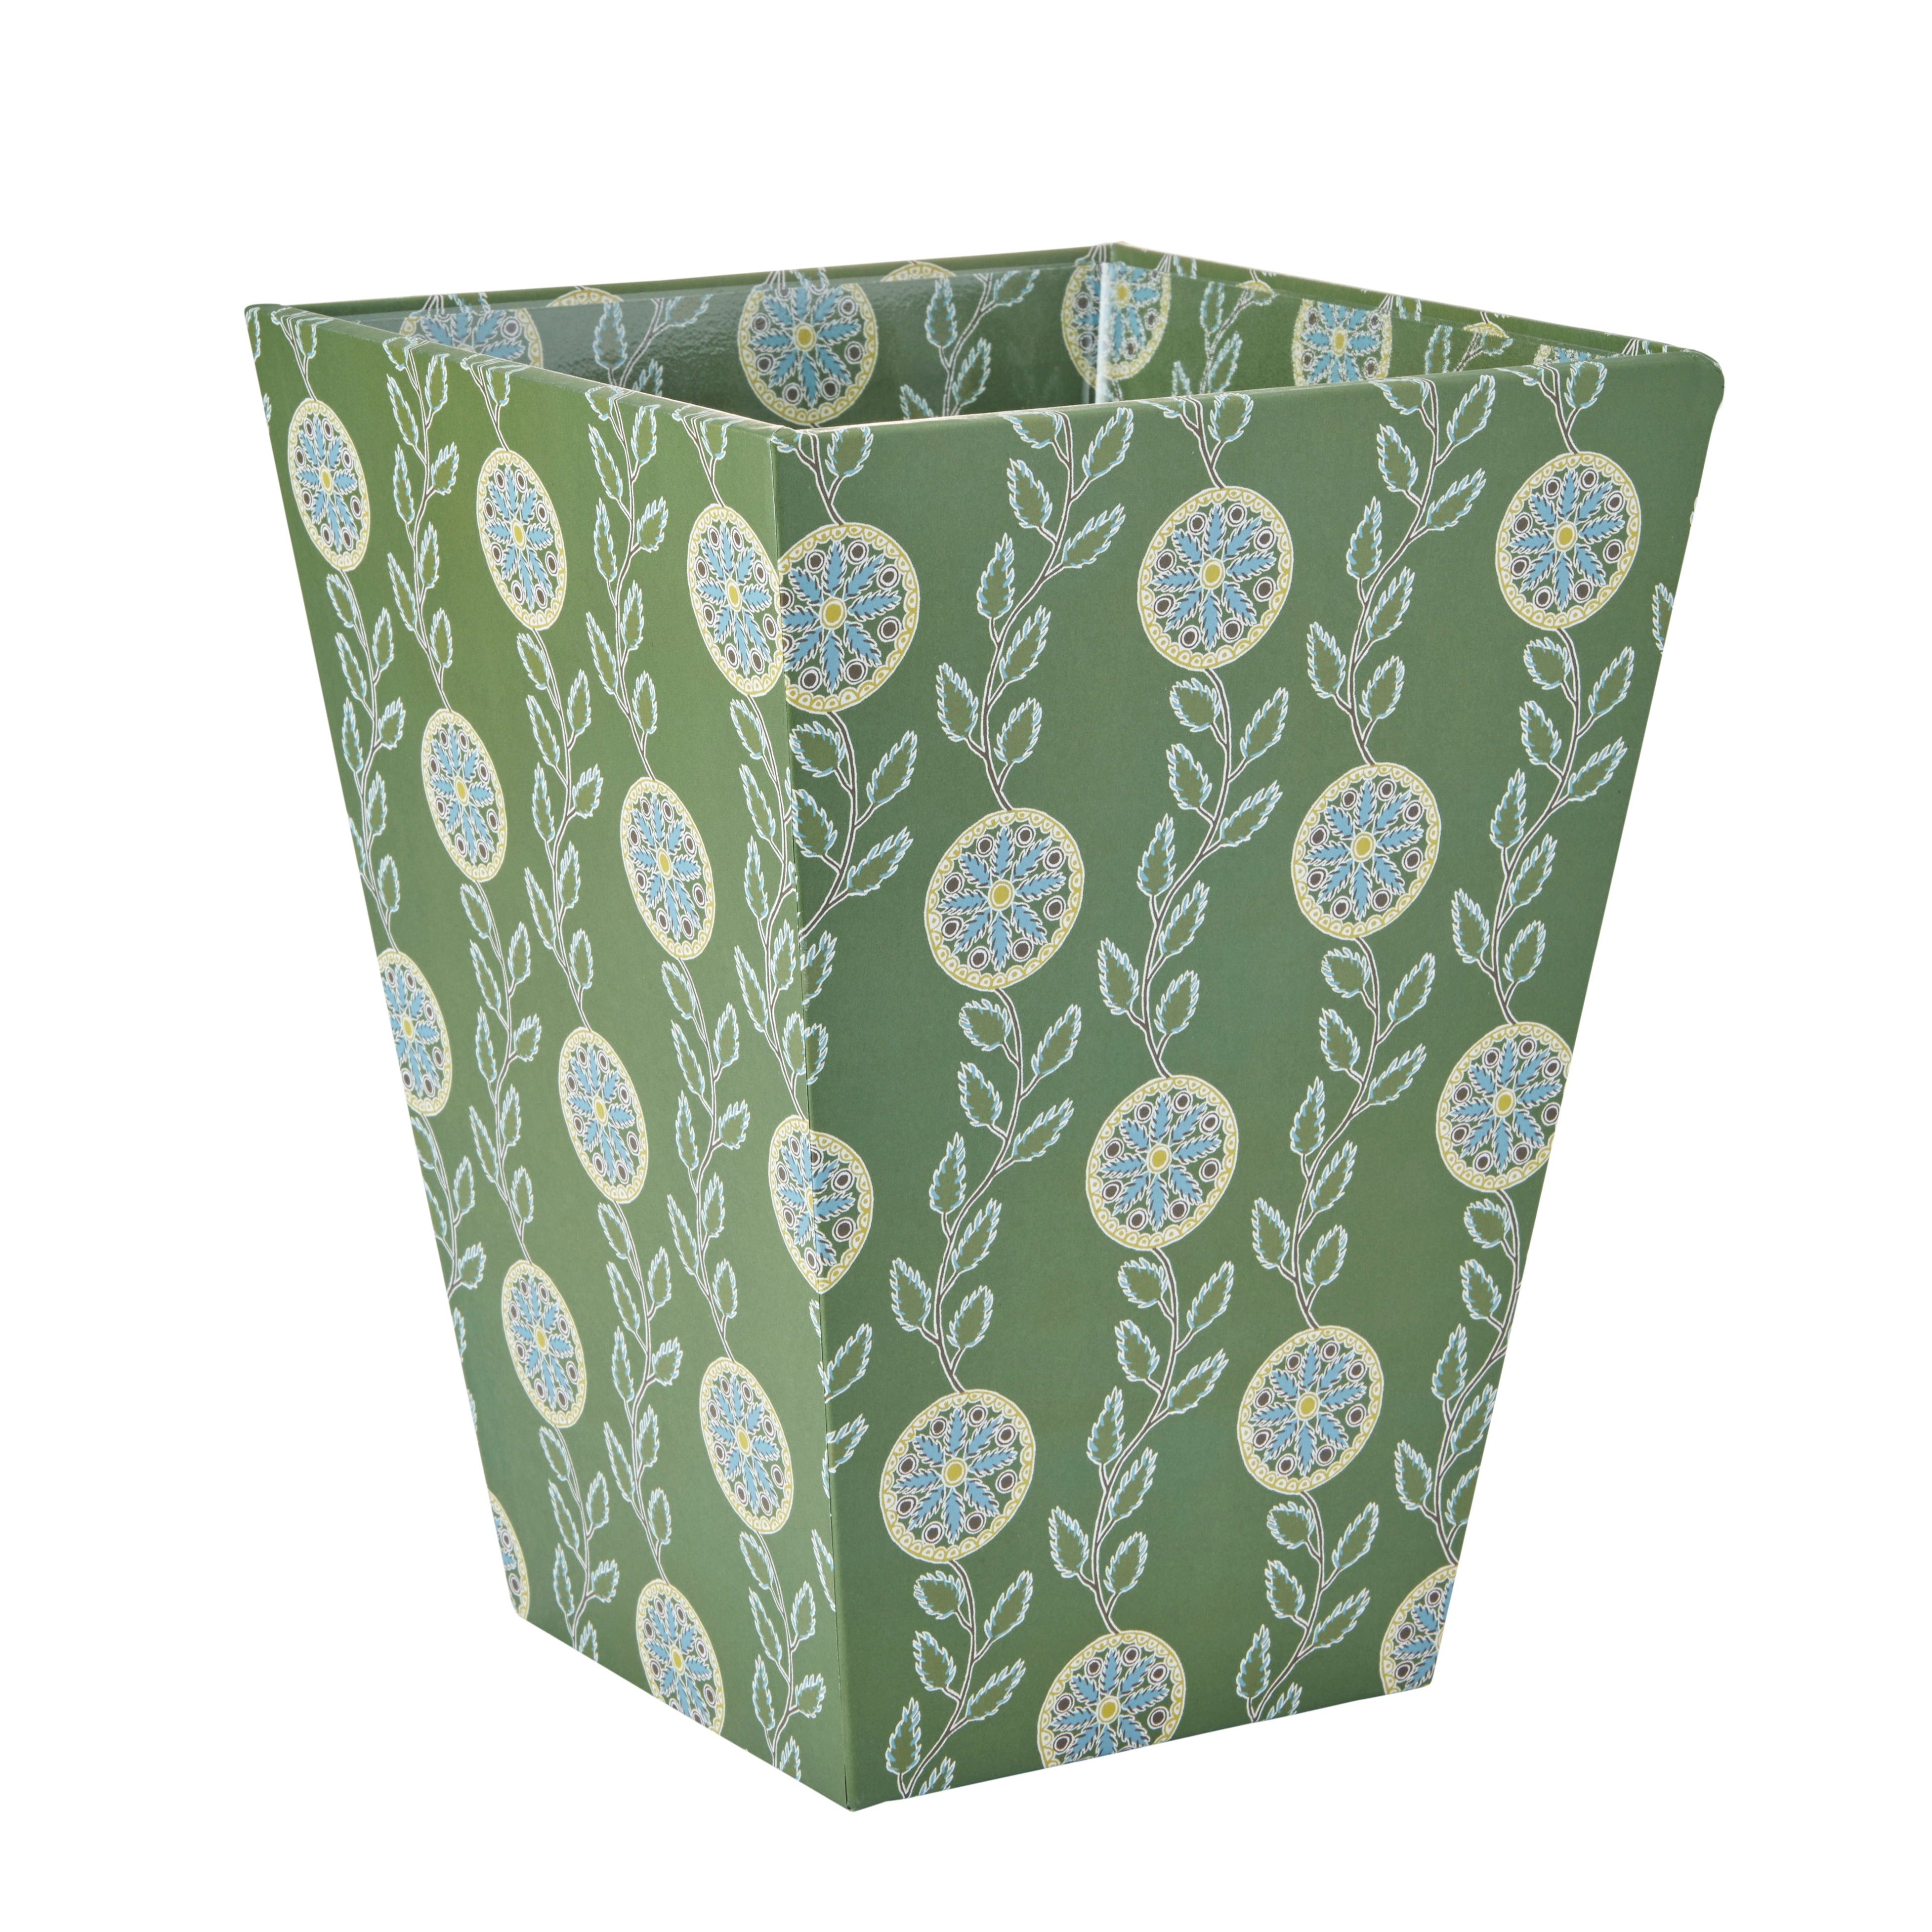 Nina Campbell waste bin in the green colour way stationery collection on white background